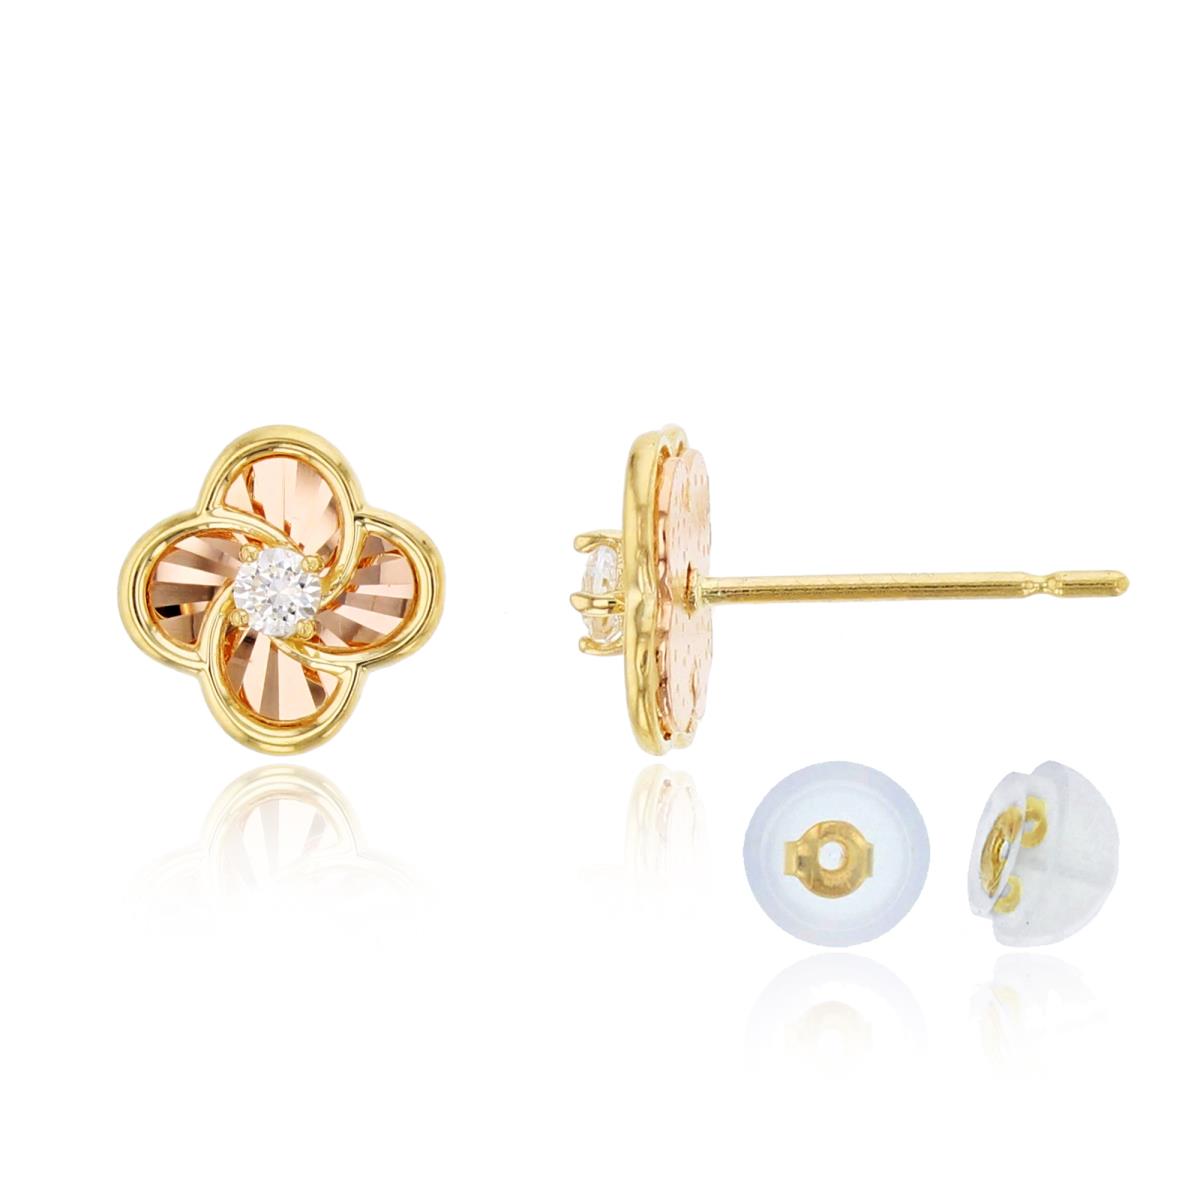 10K Yellow Gold Rnd CZ Center Diamond Cut Flower Studs with Silicon Backs